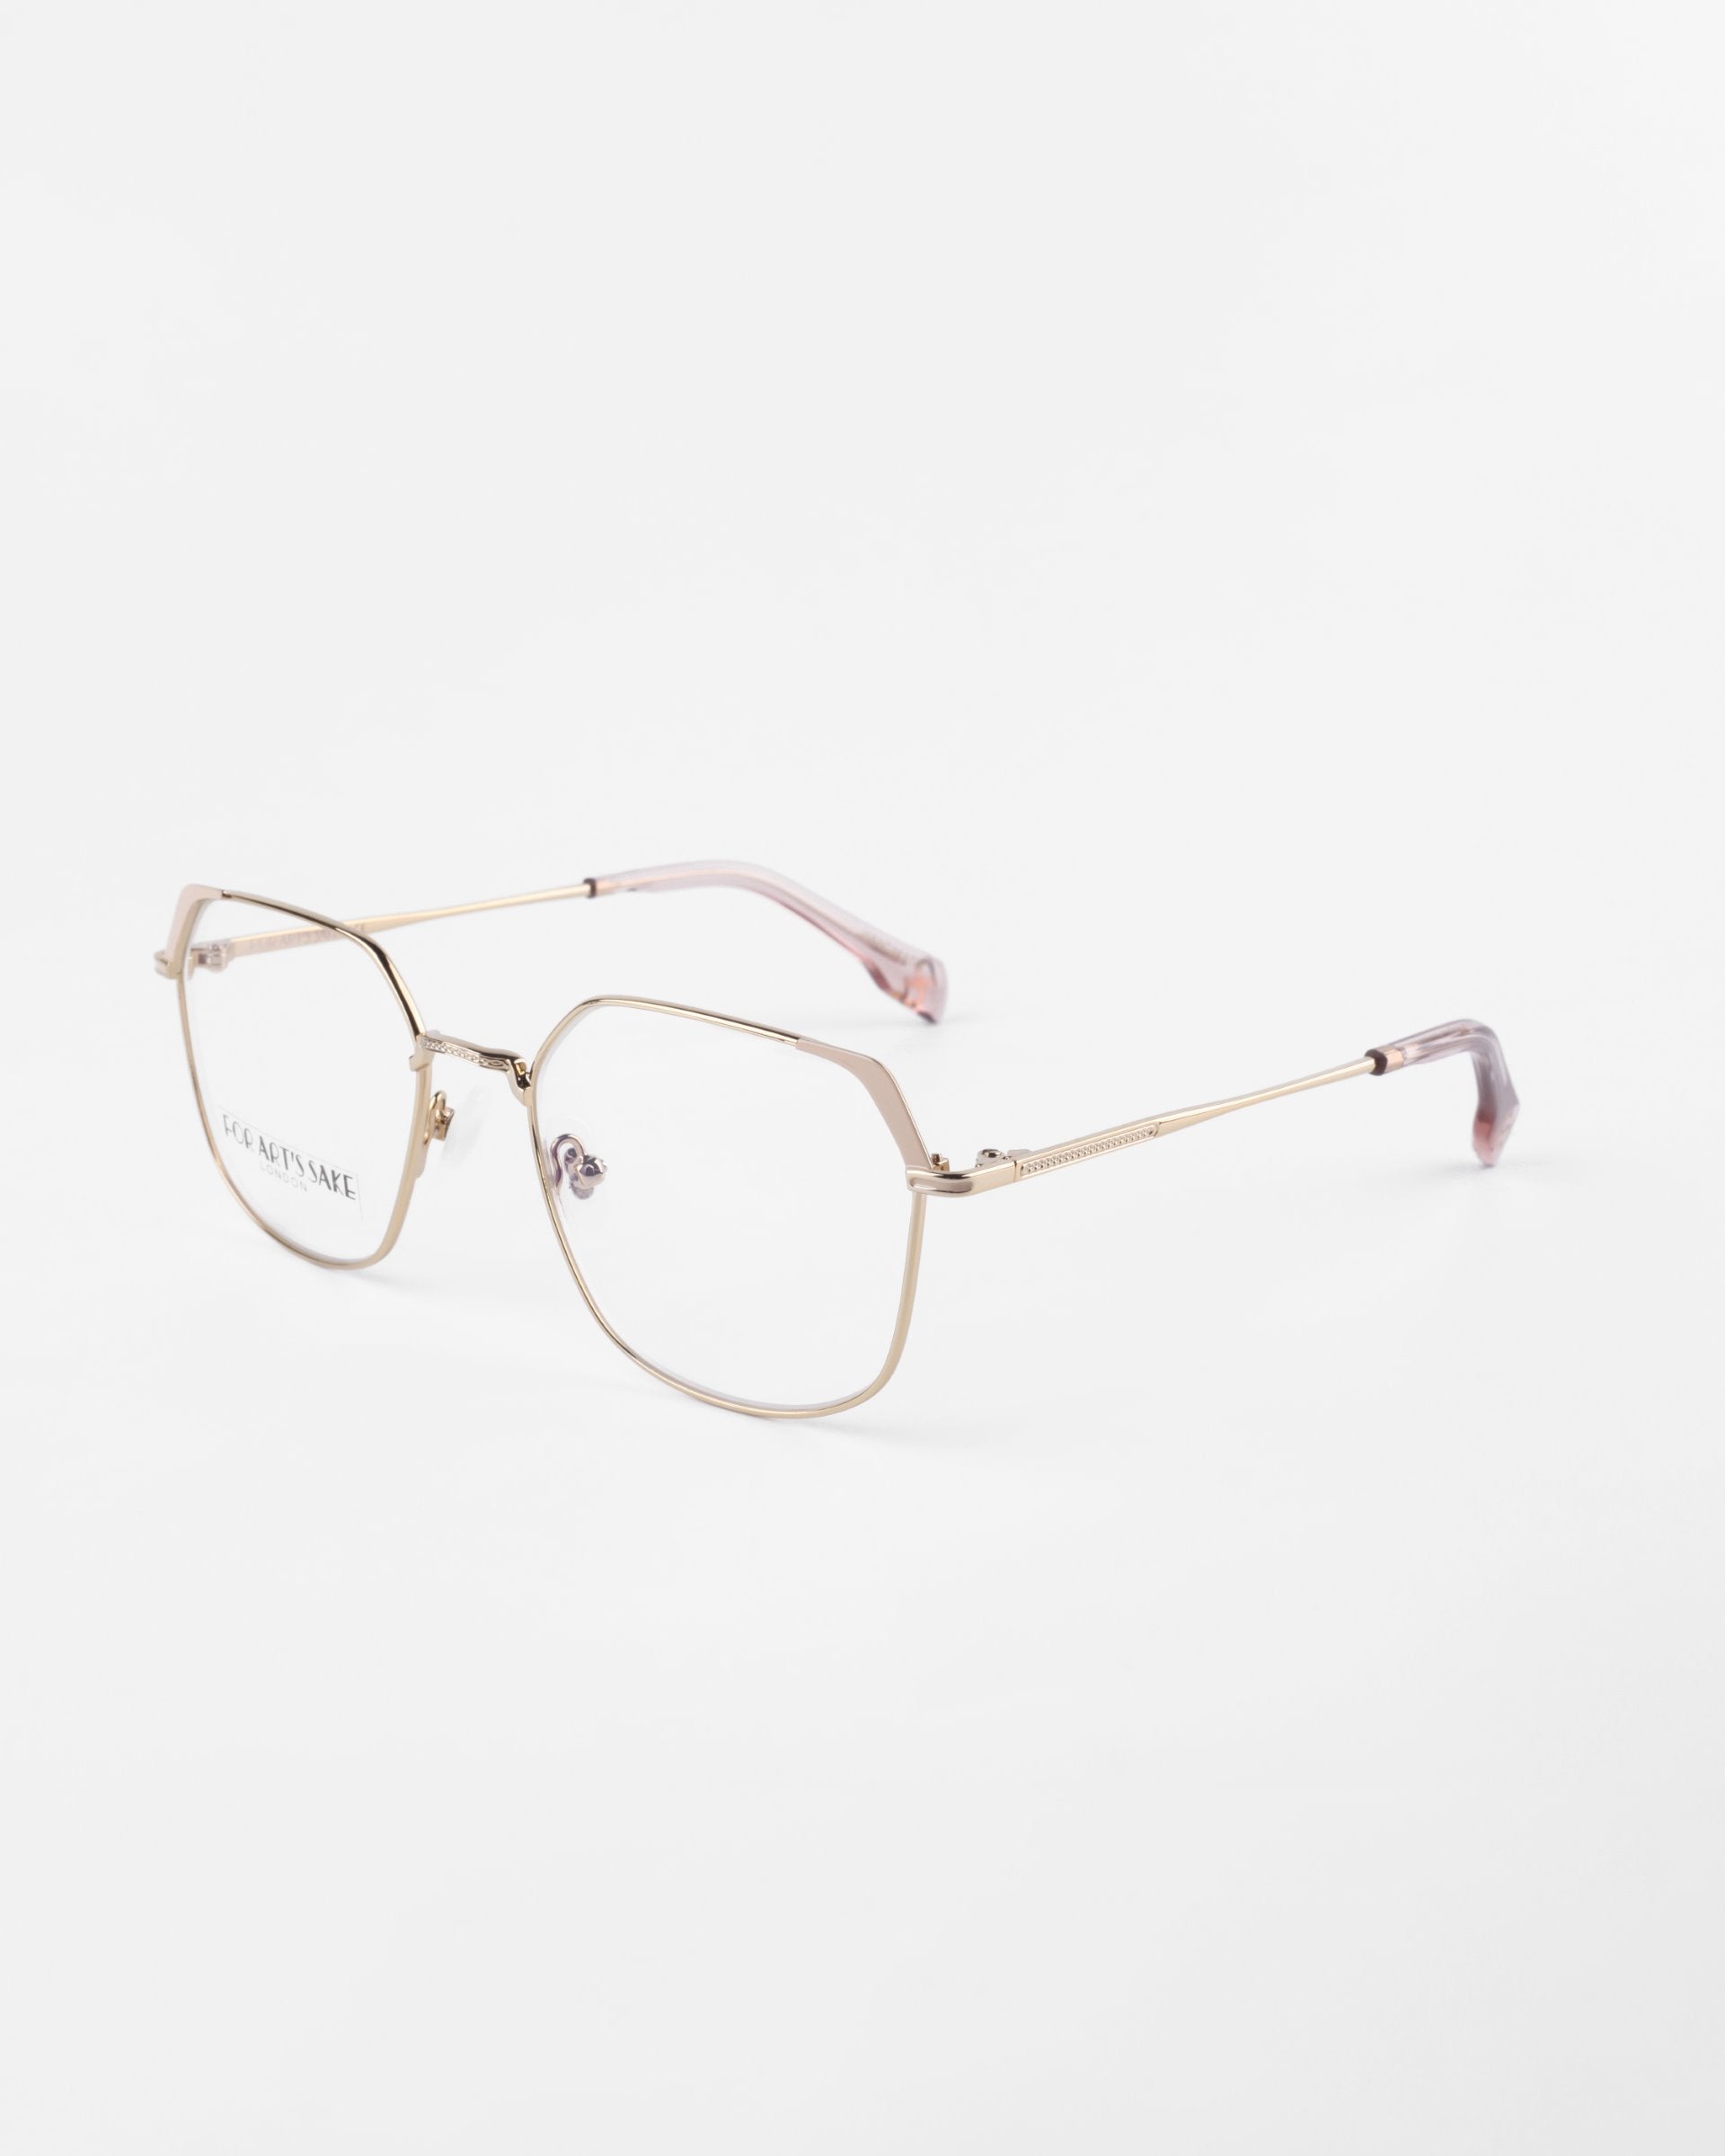 A pair of modern eyeglasses with thin, gold metal frames and clear prescription lenses featuring a blue light filter. The temples are straight with a subtle curve near the ends, which are covered with pinkish-brown tips. The white background highlights the sleek and minimalist design of the Godiva glasses by For Art's Sake®.